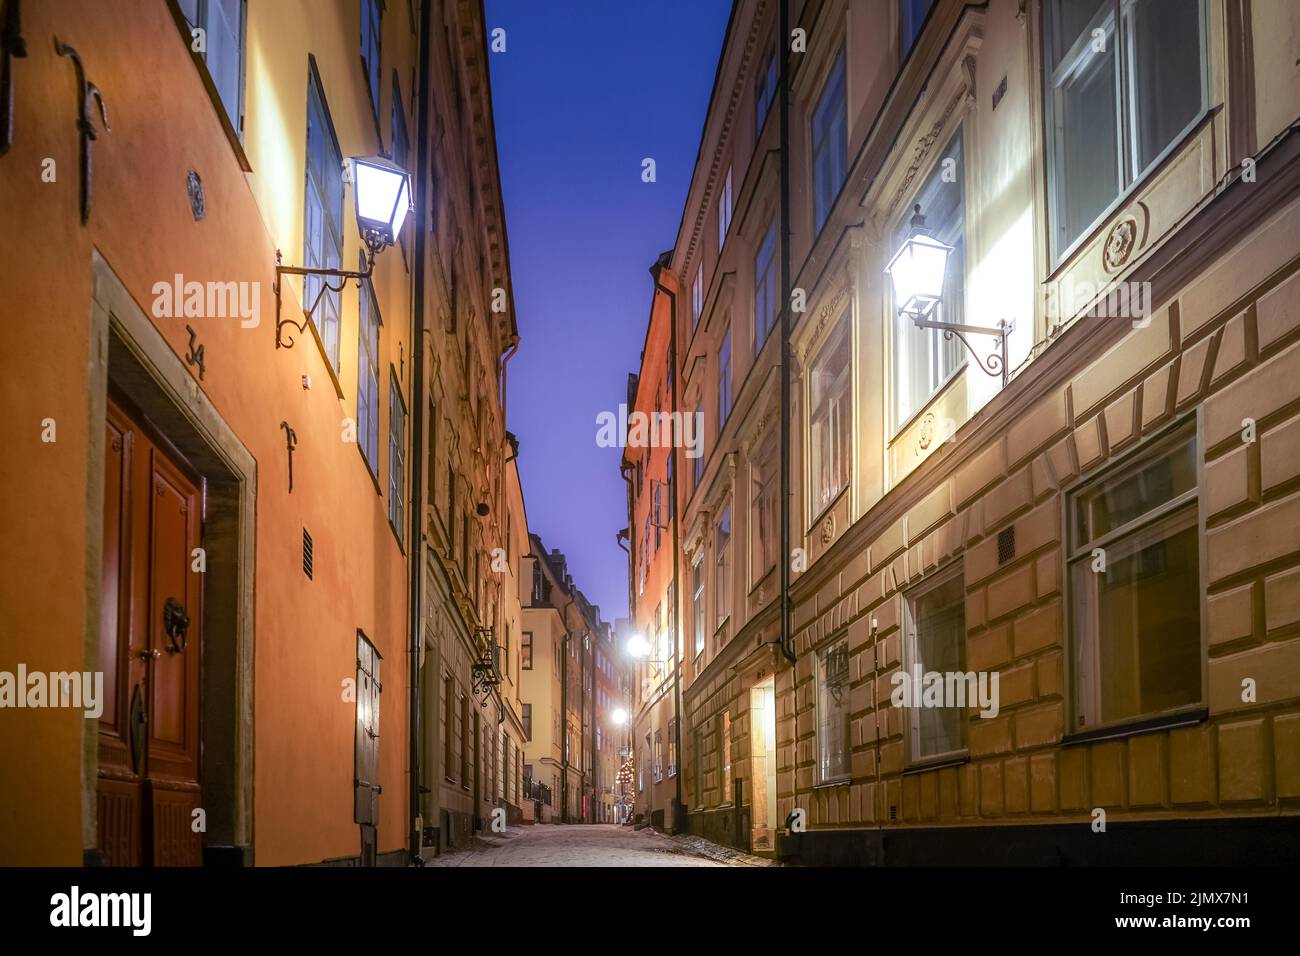 Western -style residential area Stock Photo